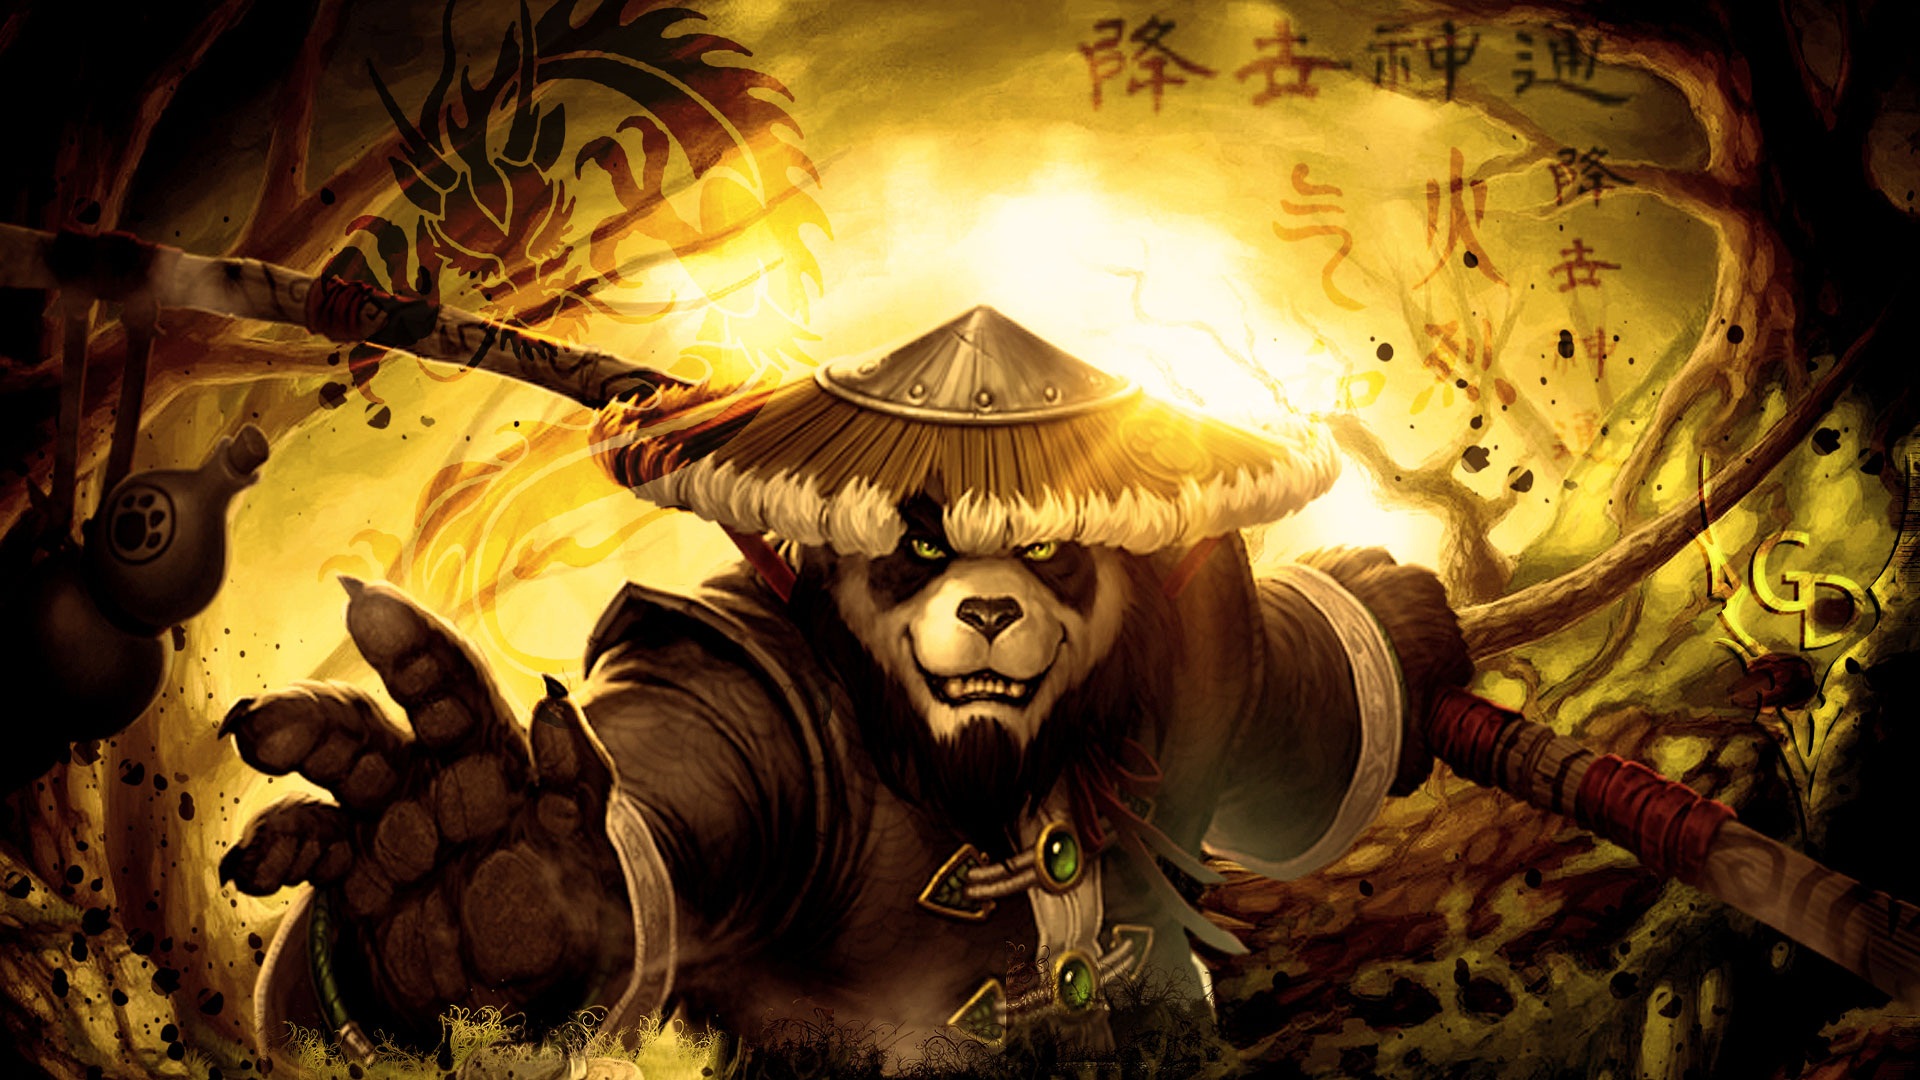 World of Warcraft: Mists of Pandaria HD wallpapers #10 - 1920x1080